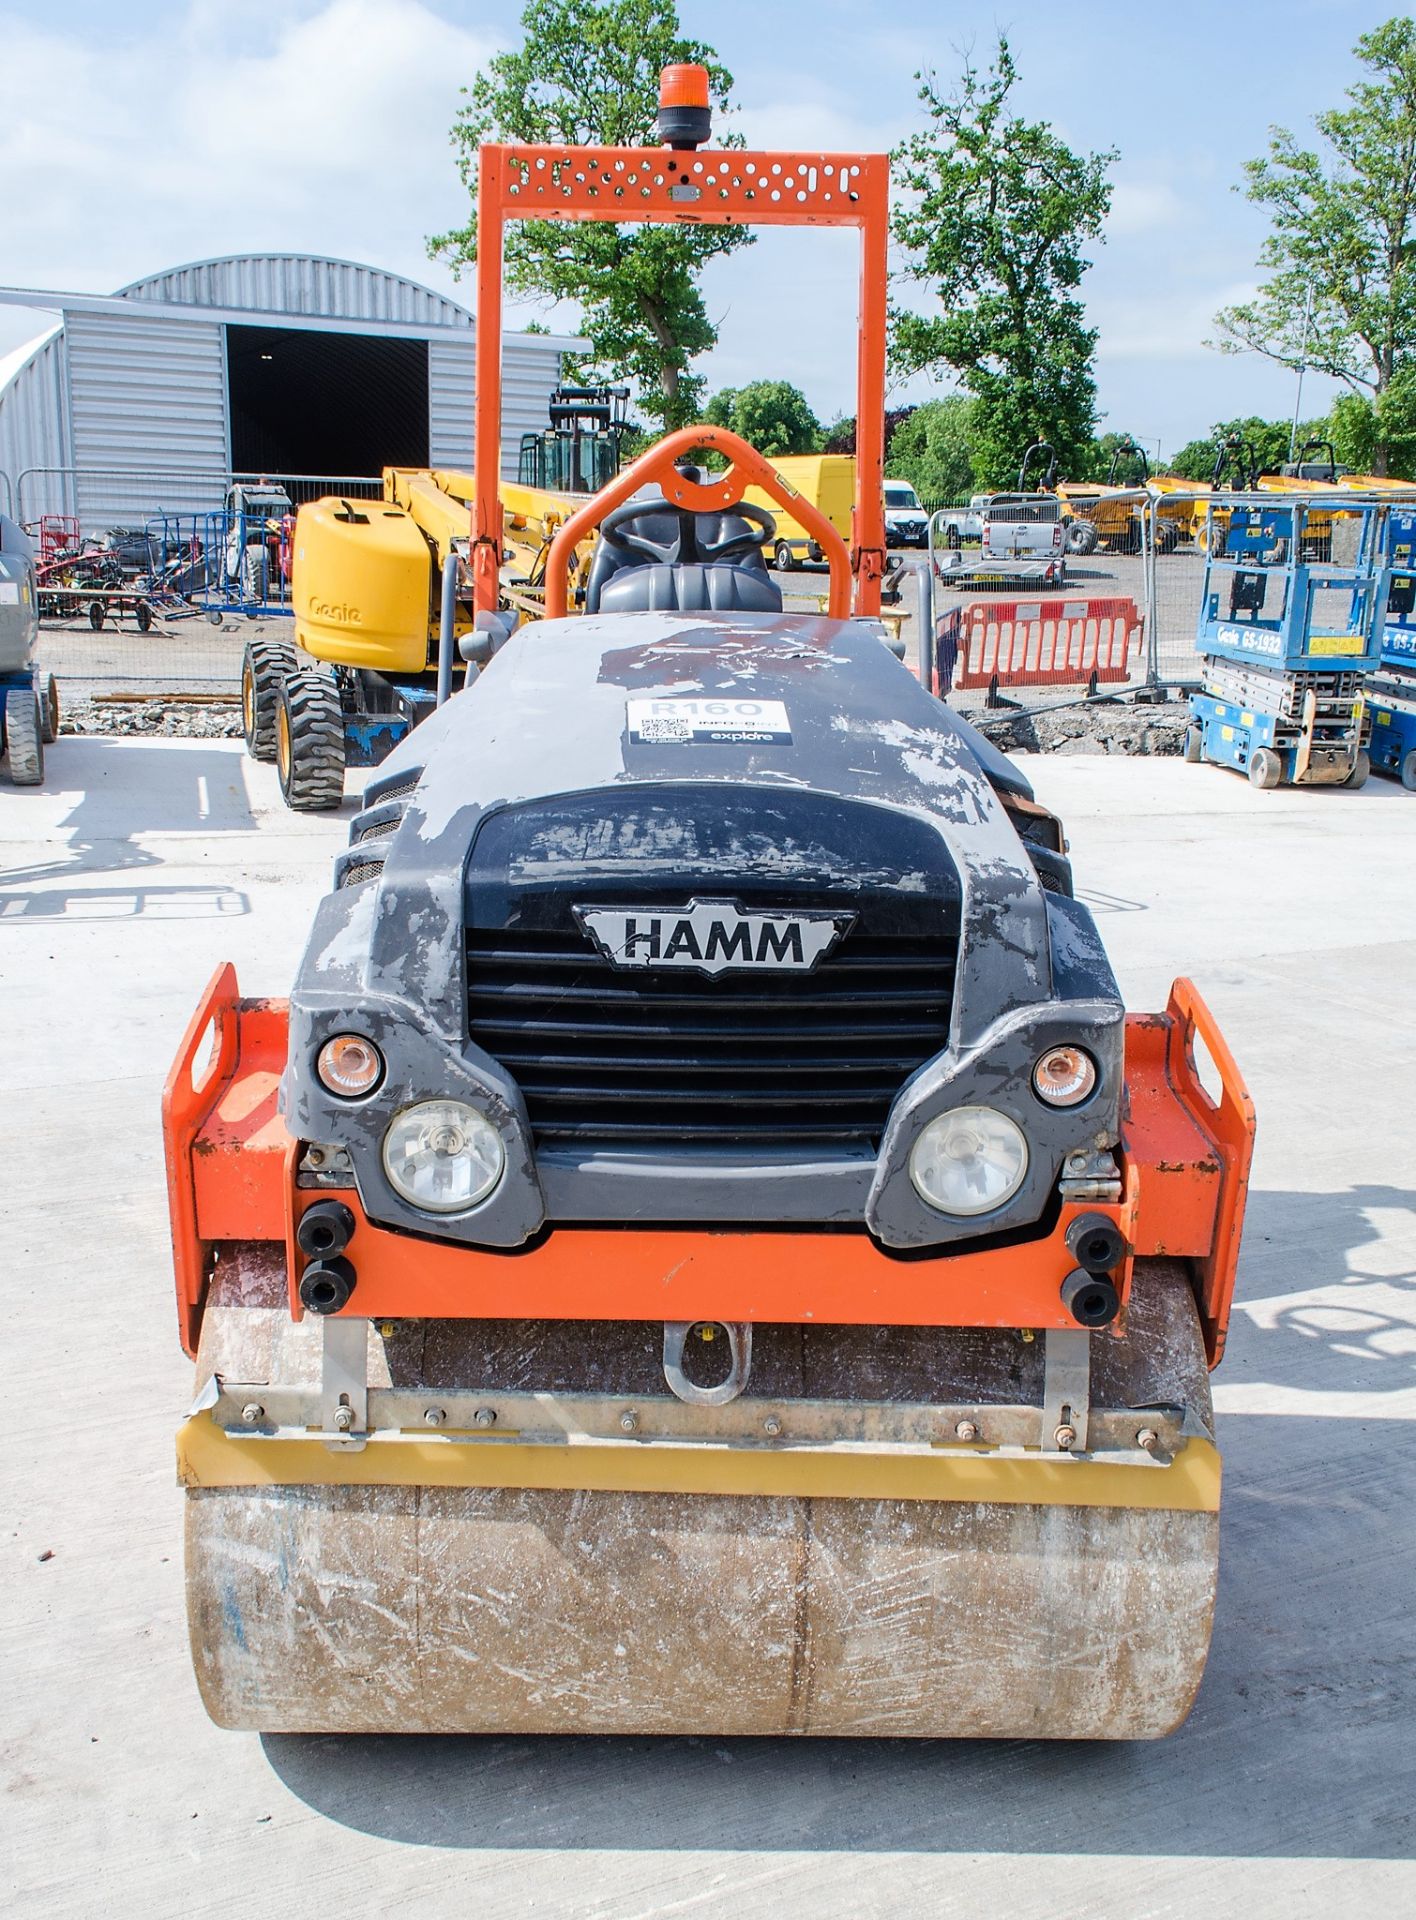 Hamm HD 12 double drum roller Year: 2014 S/N: 2004629 Recorded Hours: 1236 - Image 5 of 20